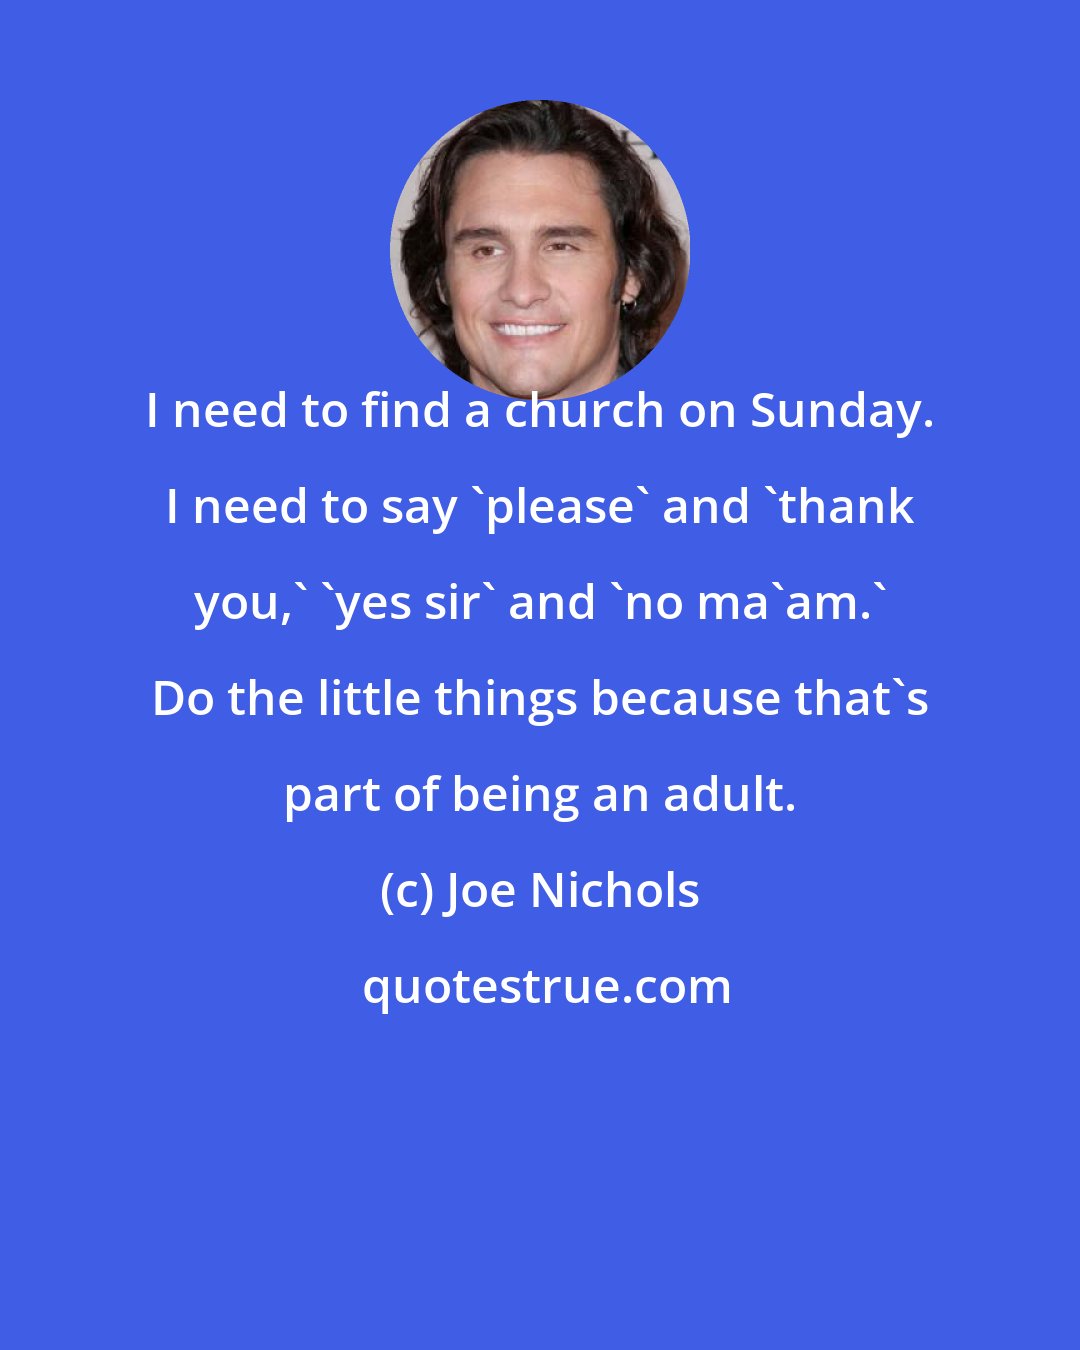 Joe Nichols: I need to find a church on Sunday. I need to say 'please' and 'thank you,' 'yes sir' and 'no ma'am.' Do the little things because that's part of being an adult.